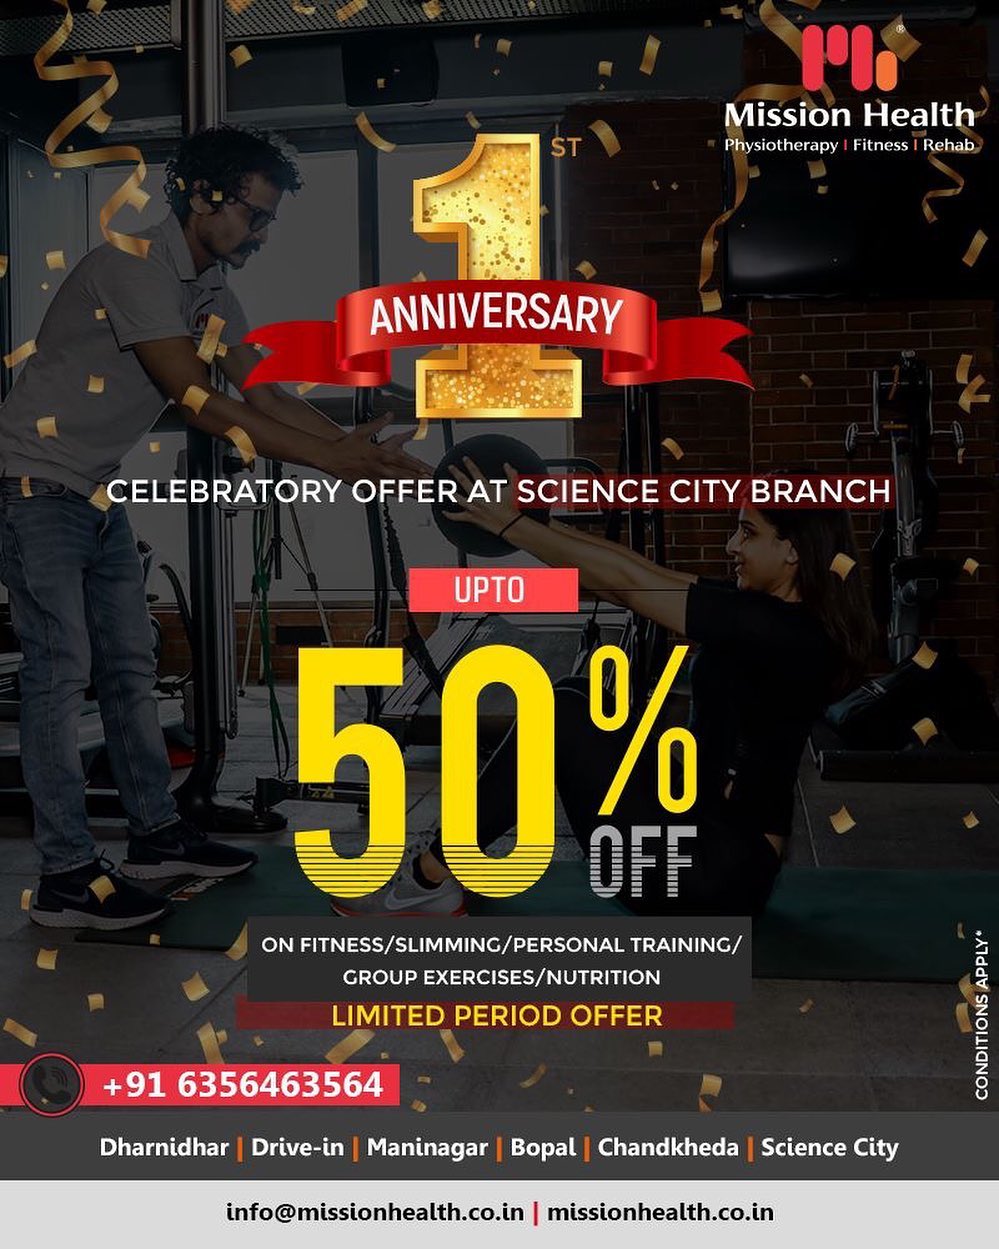 Come celebrate with us with up to 50% on all fitness & related services all this week as we celebrate ONE year of our Science City branch! 
#Offer #OneYear #Celebration #MissionHealth #MissionHealthIndia #MovementIsLife